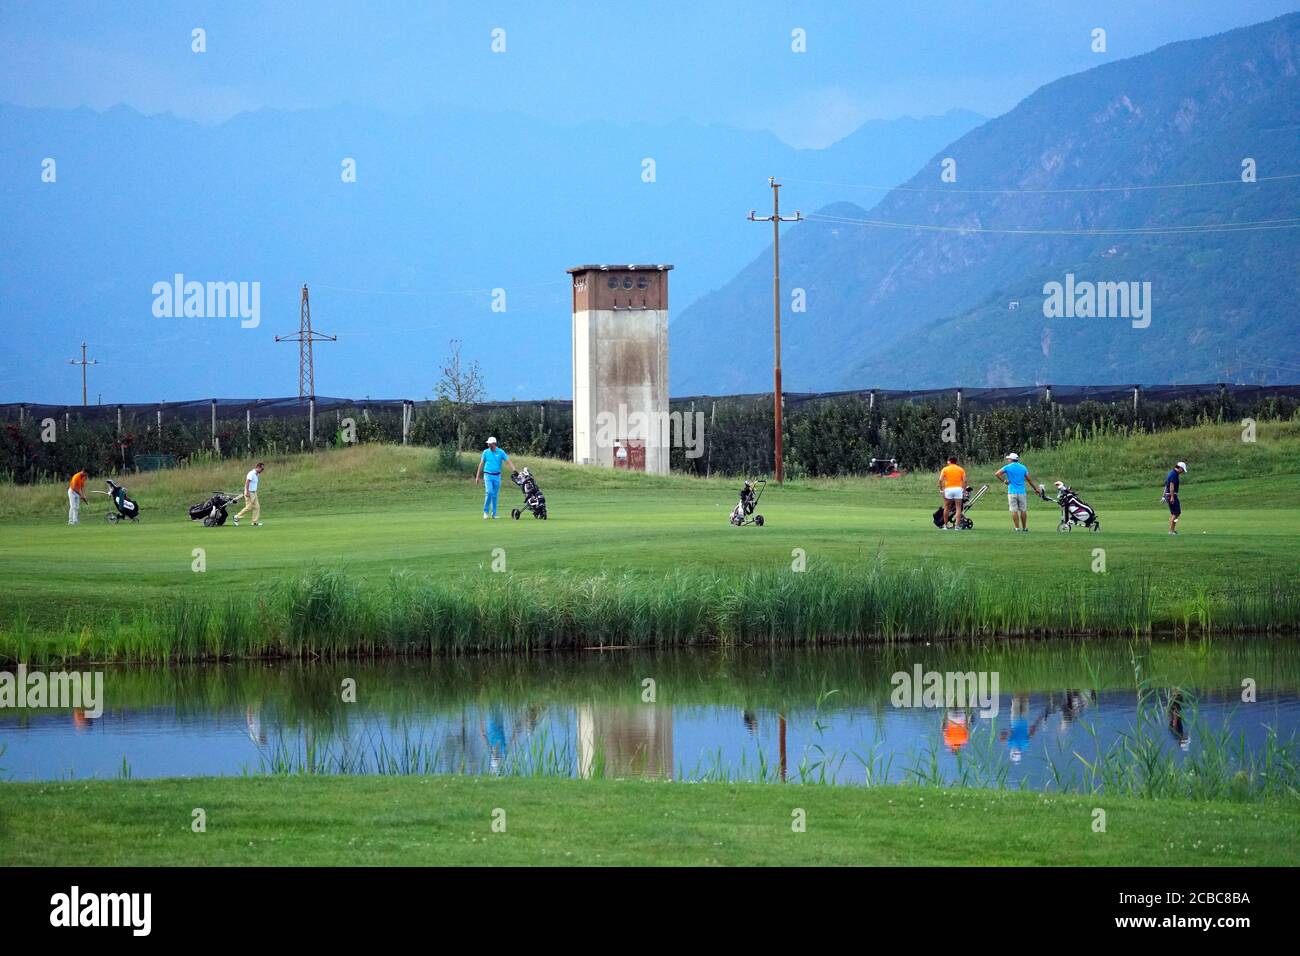 Group of friends - golfers enjoying the game in the Blue Monster Golf Club in South Tirol Italy after COVID-19 lock down on August 11th, 2020. Stock Photo